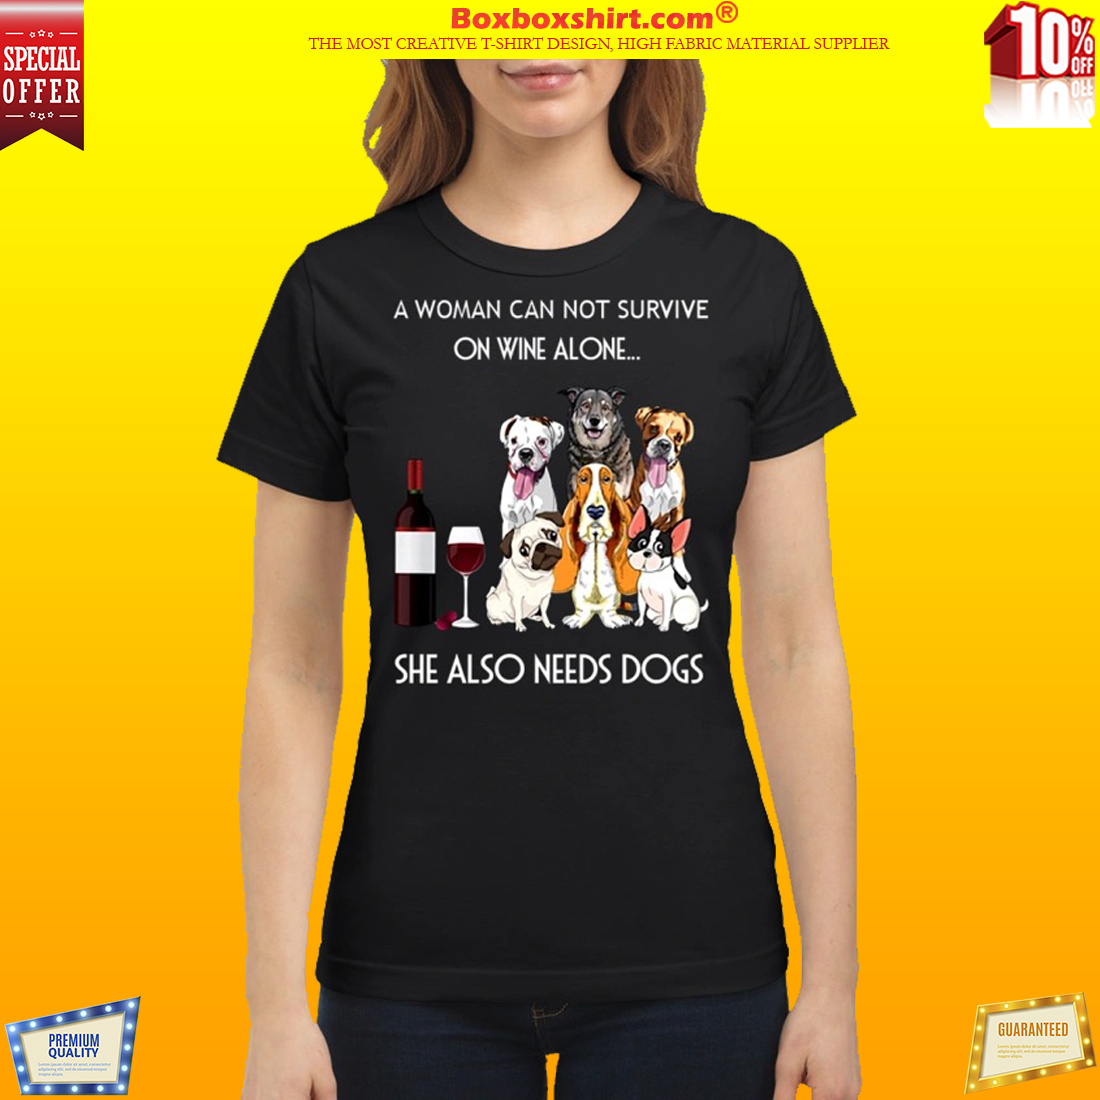 A woman cannot survive one wine alone she also need dog shirt